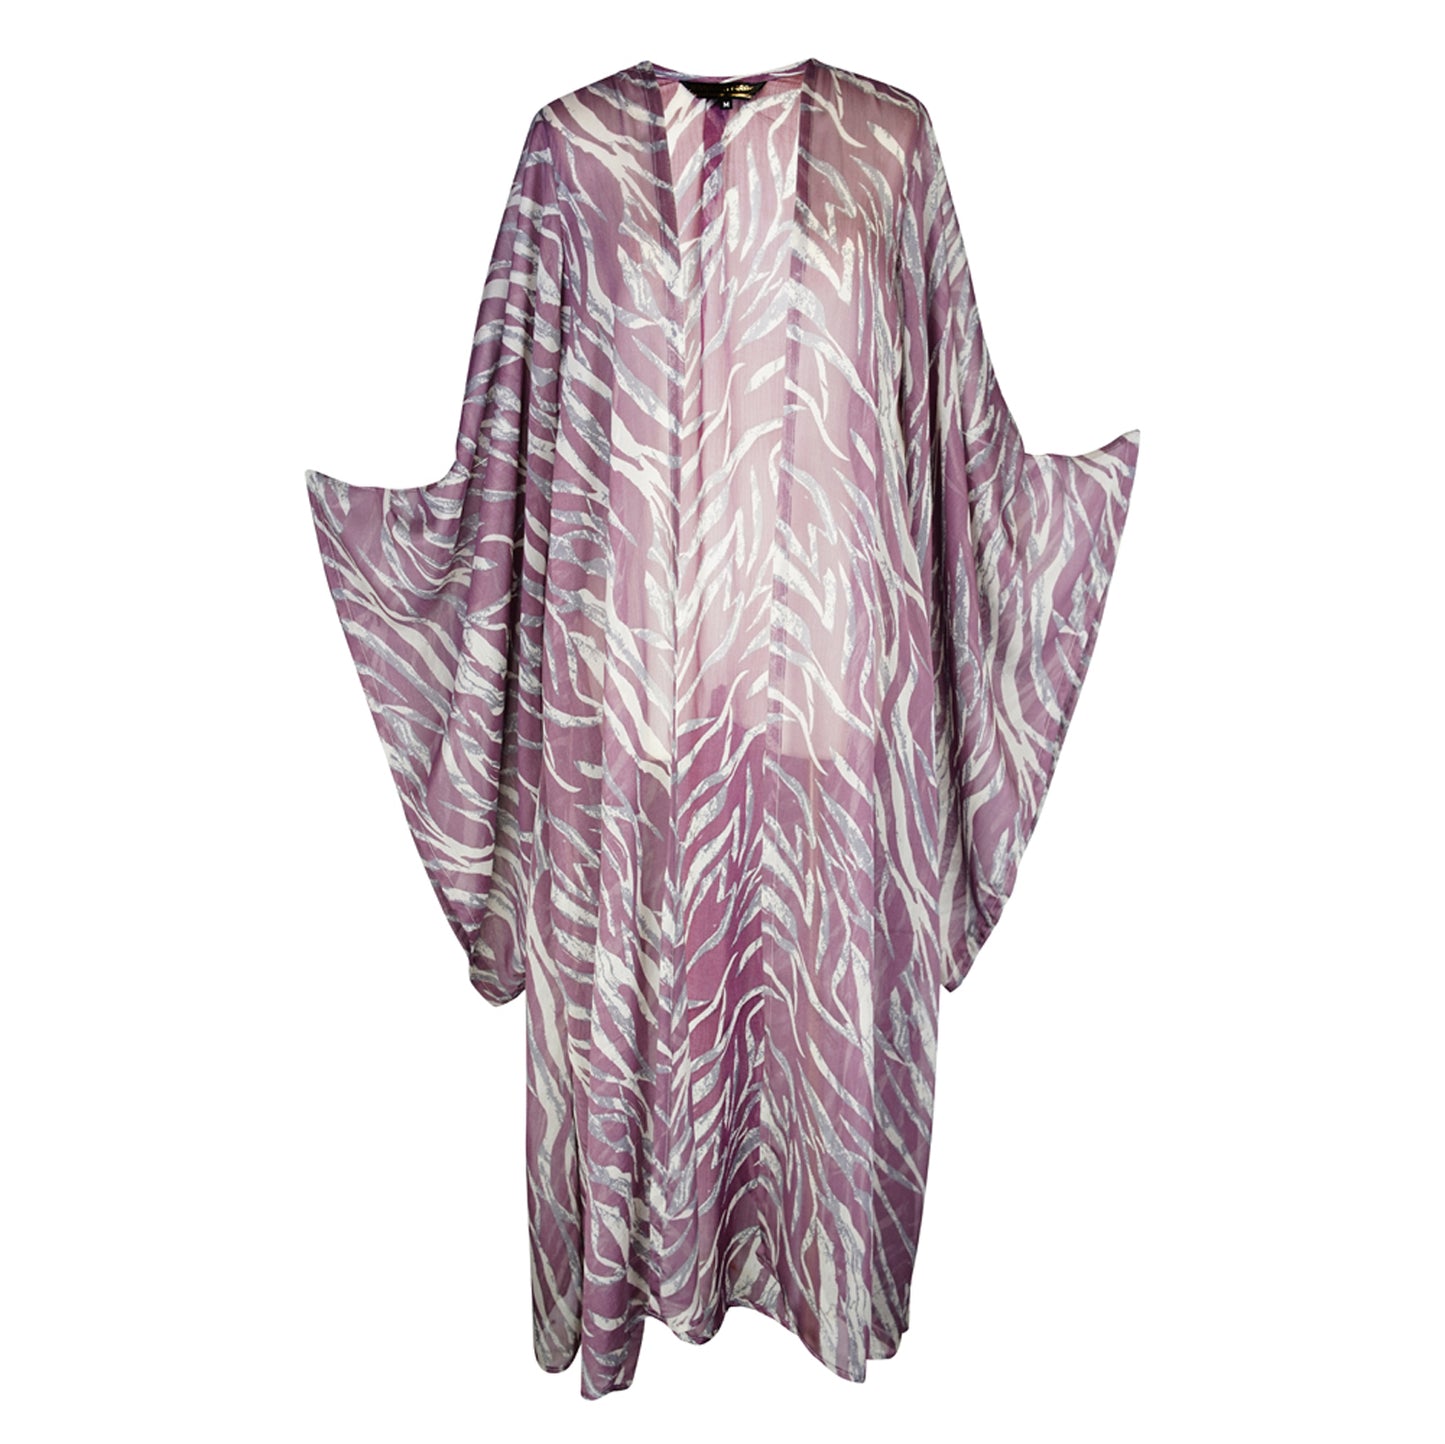 Mauve purple zebra print kimono with belt. Can be worn open as a robe or wrap dress. Long flowy sleeves with ankle hem. Made from semi sheer rayon chiffon fabric.